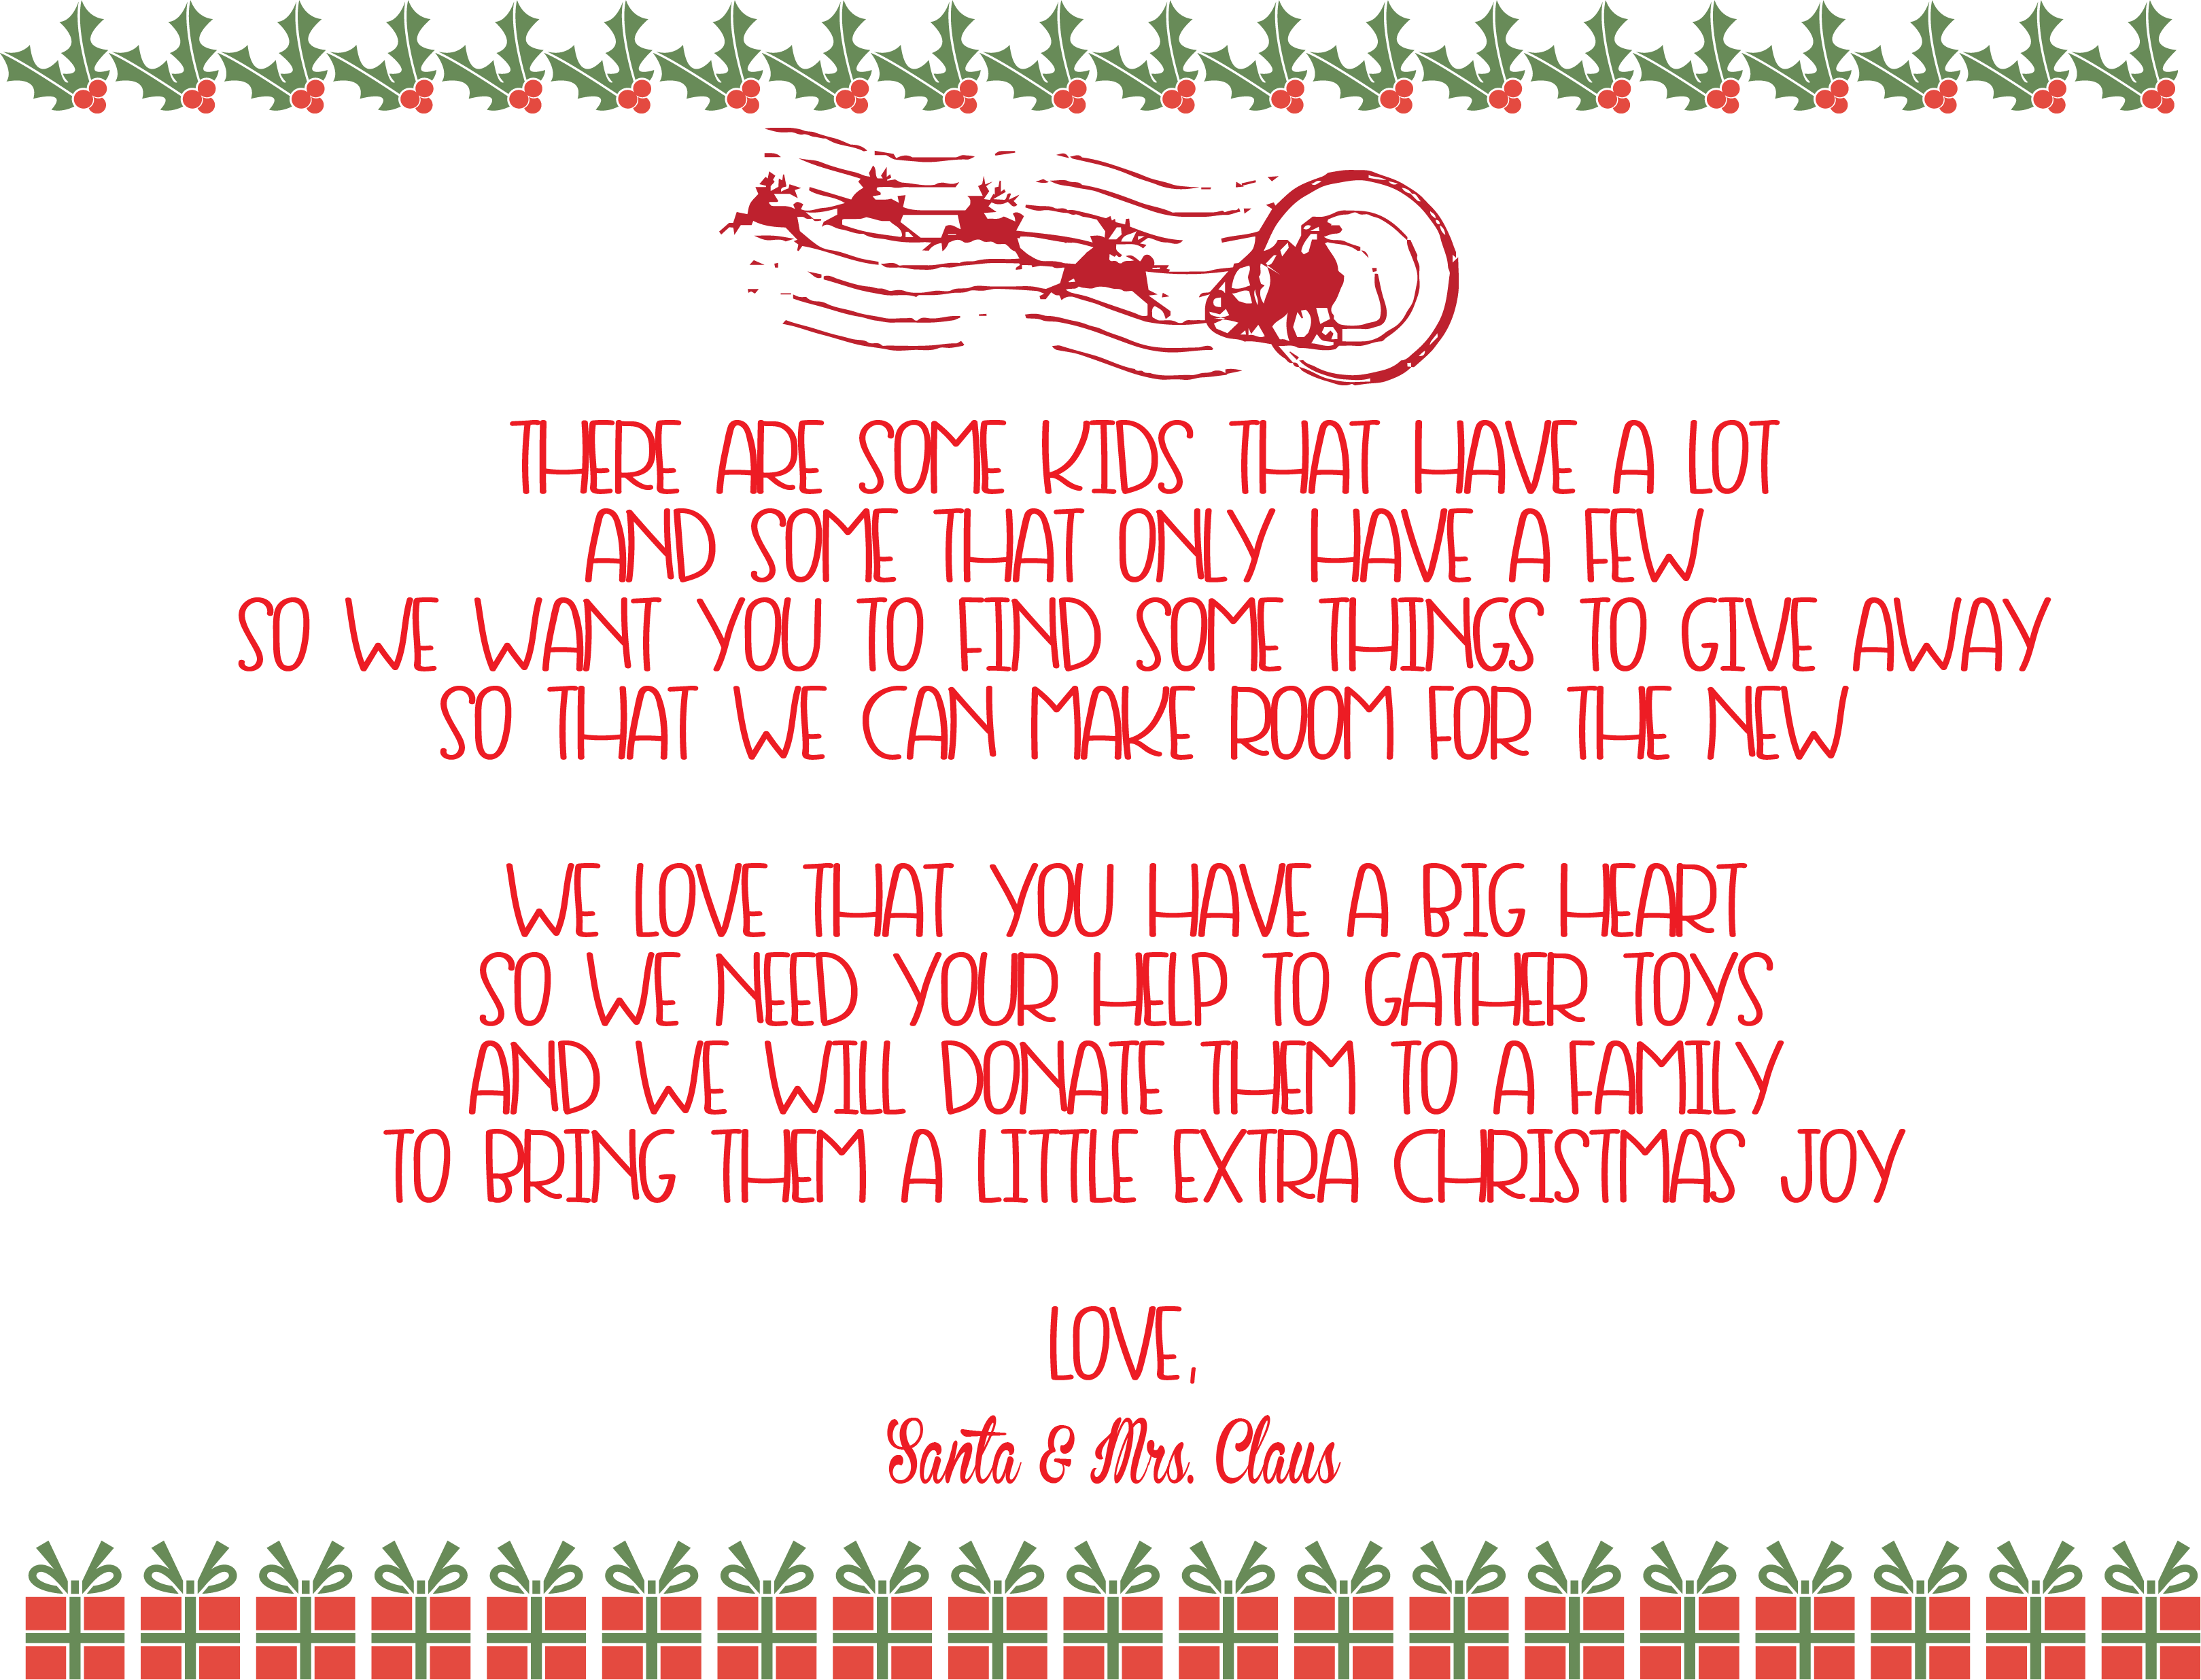 a-special-request-from-santa-elf-on-the-shelf-printable-a-little-moore